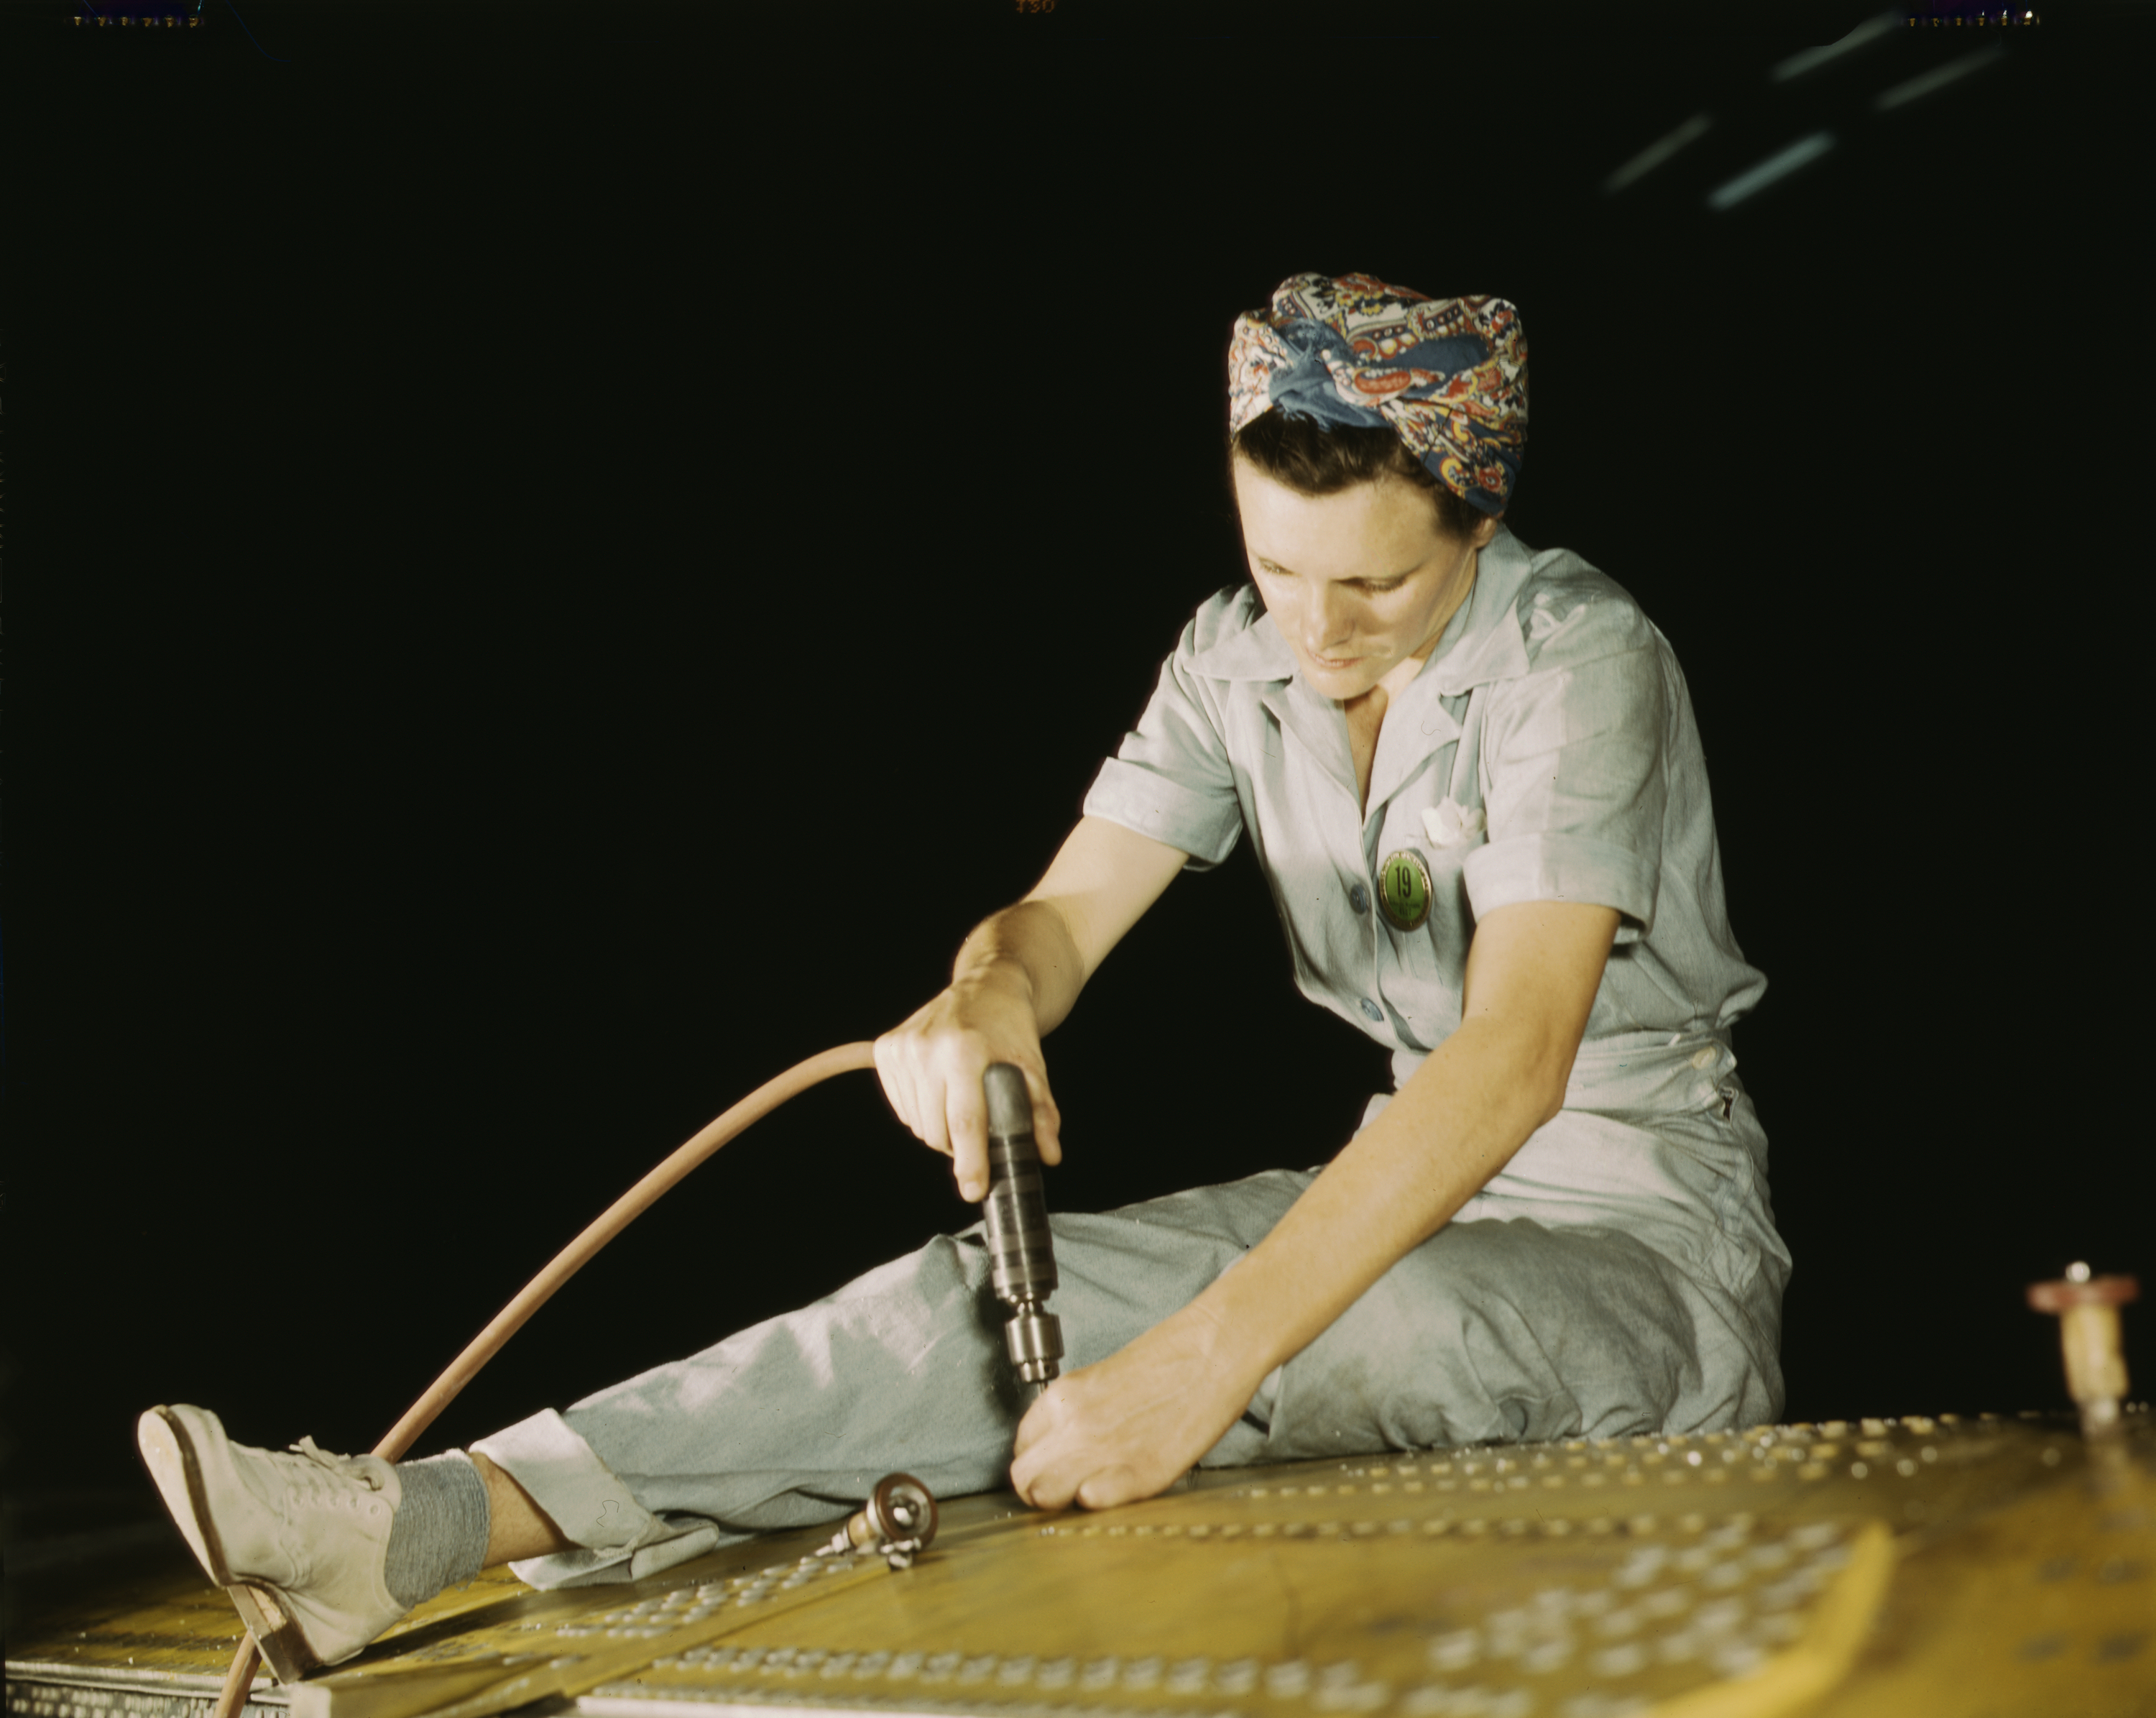 Aircraft Worker Drilling on a Liberator Bomber